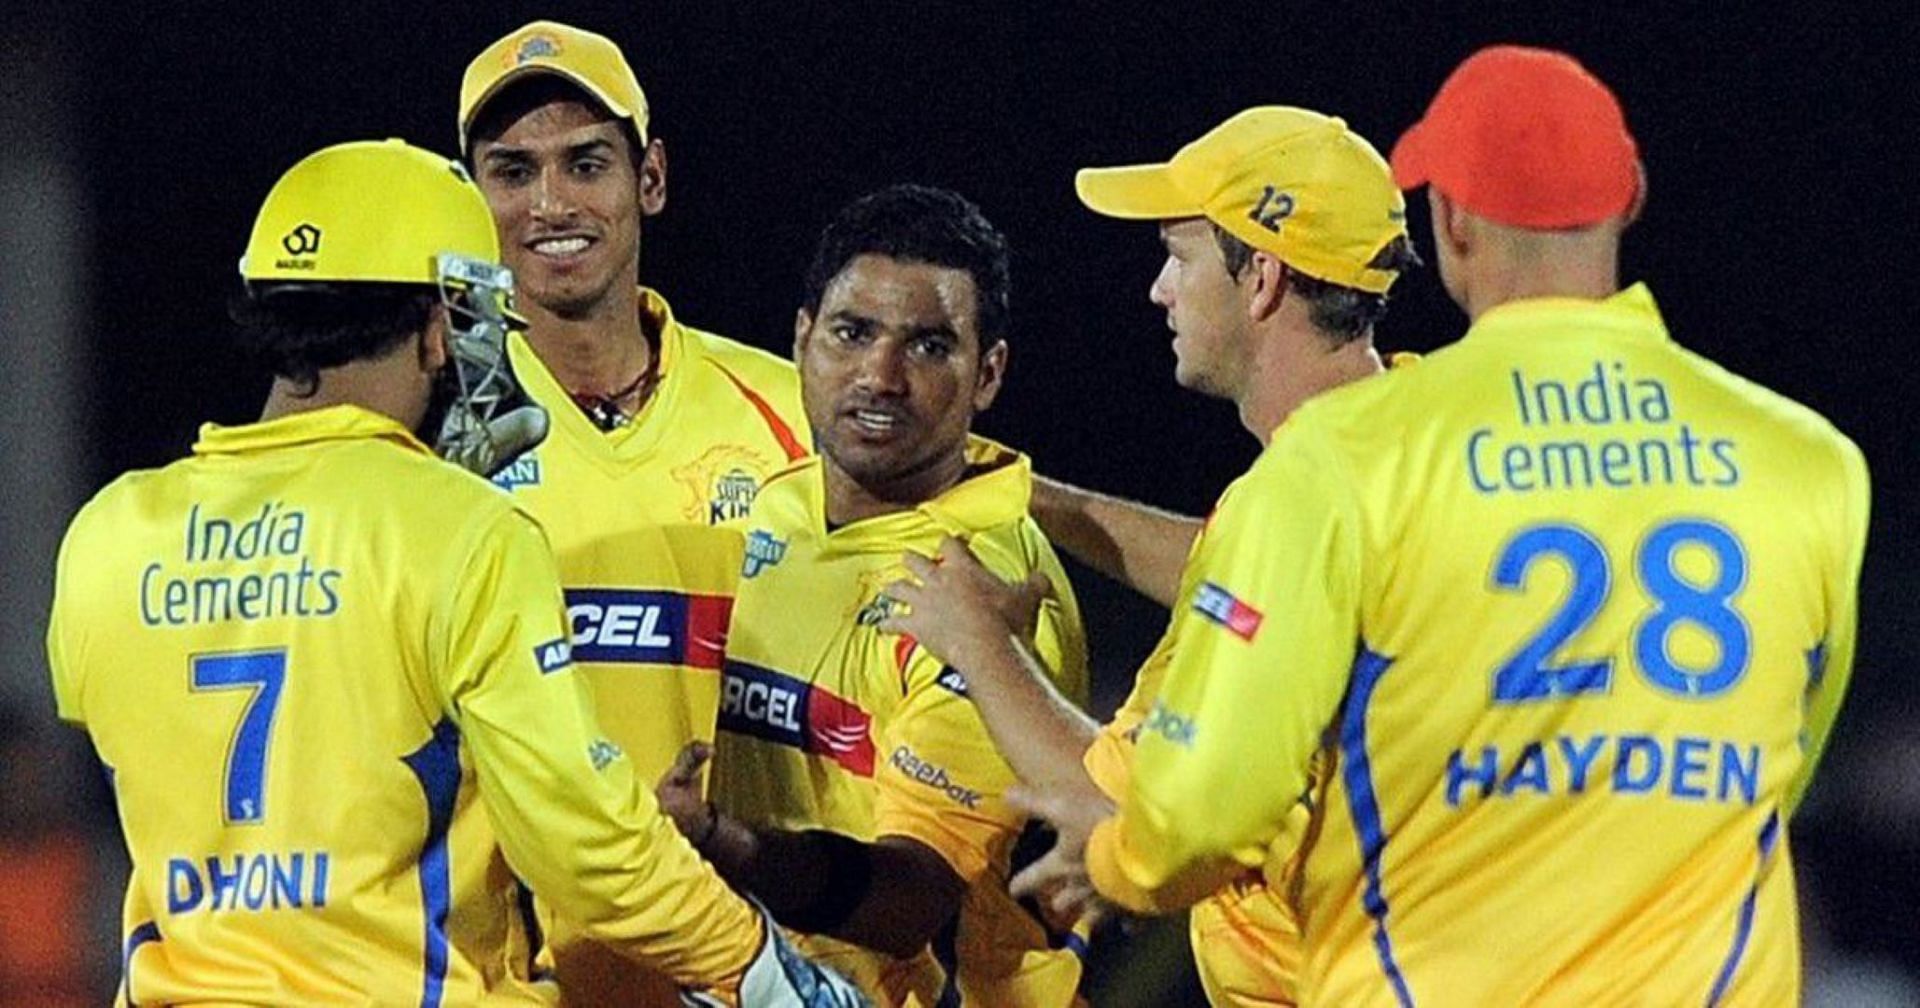 Jakati&#039;s double-wicket over helped turn the tide towards CSK in the IPL 2010 final.